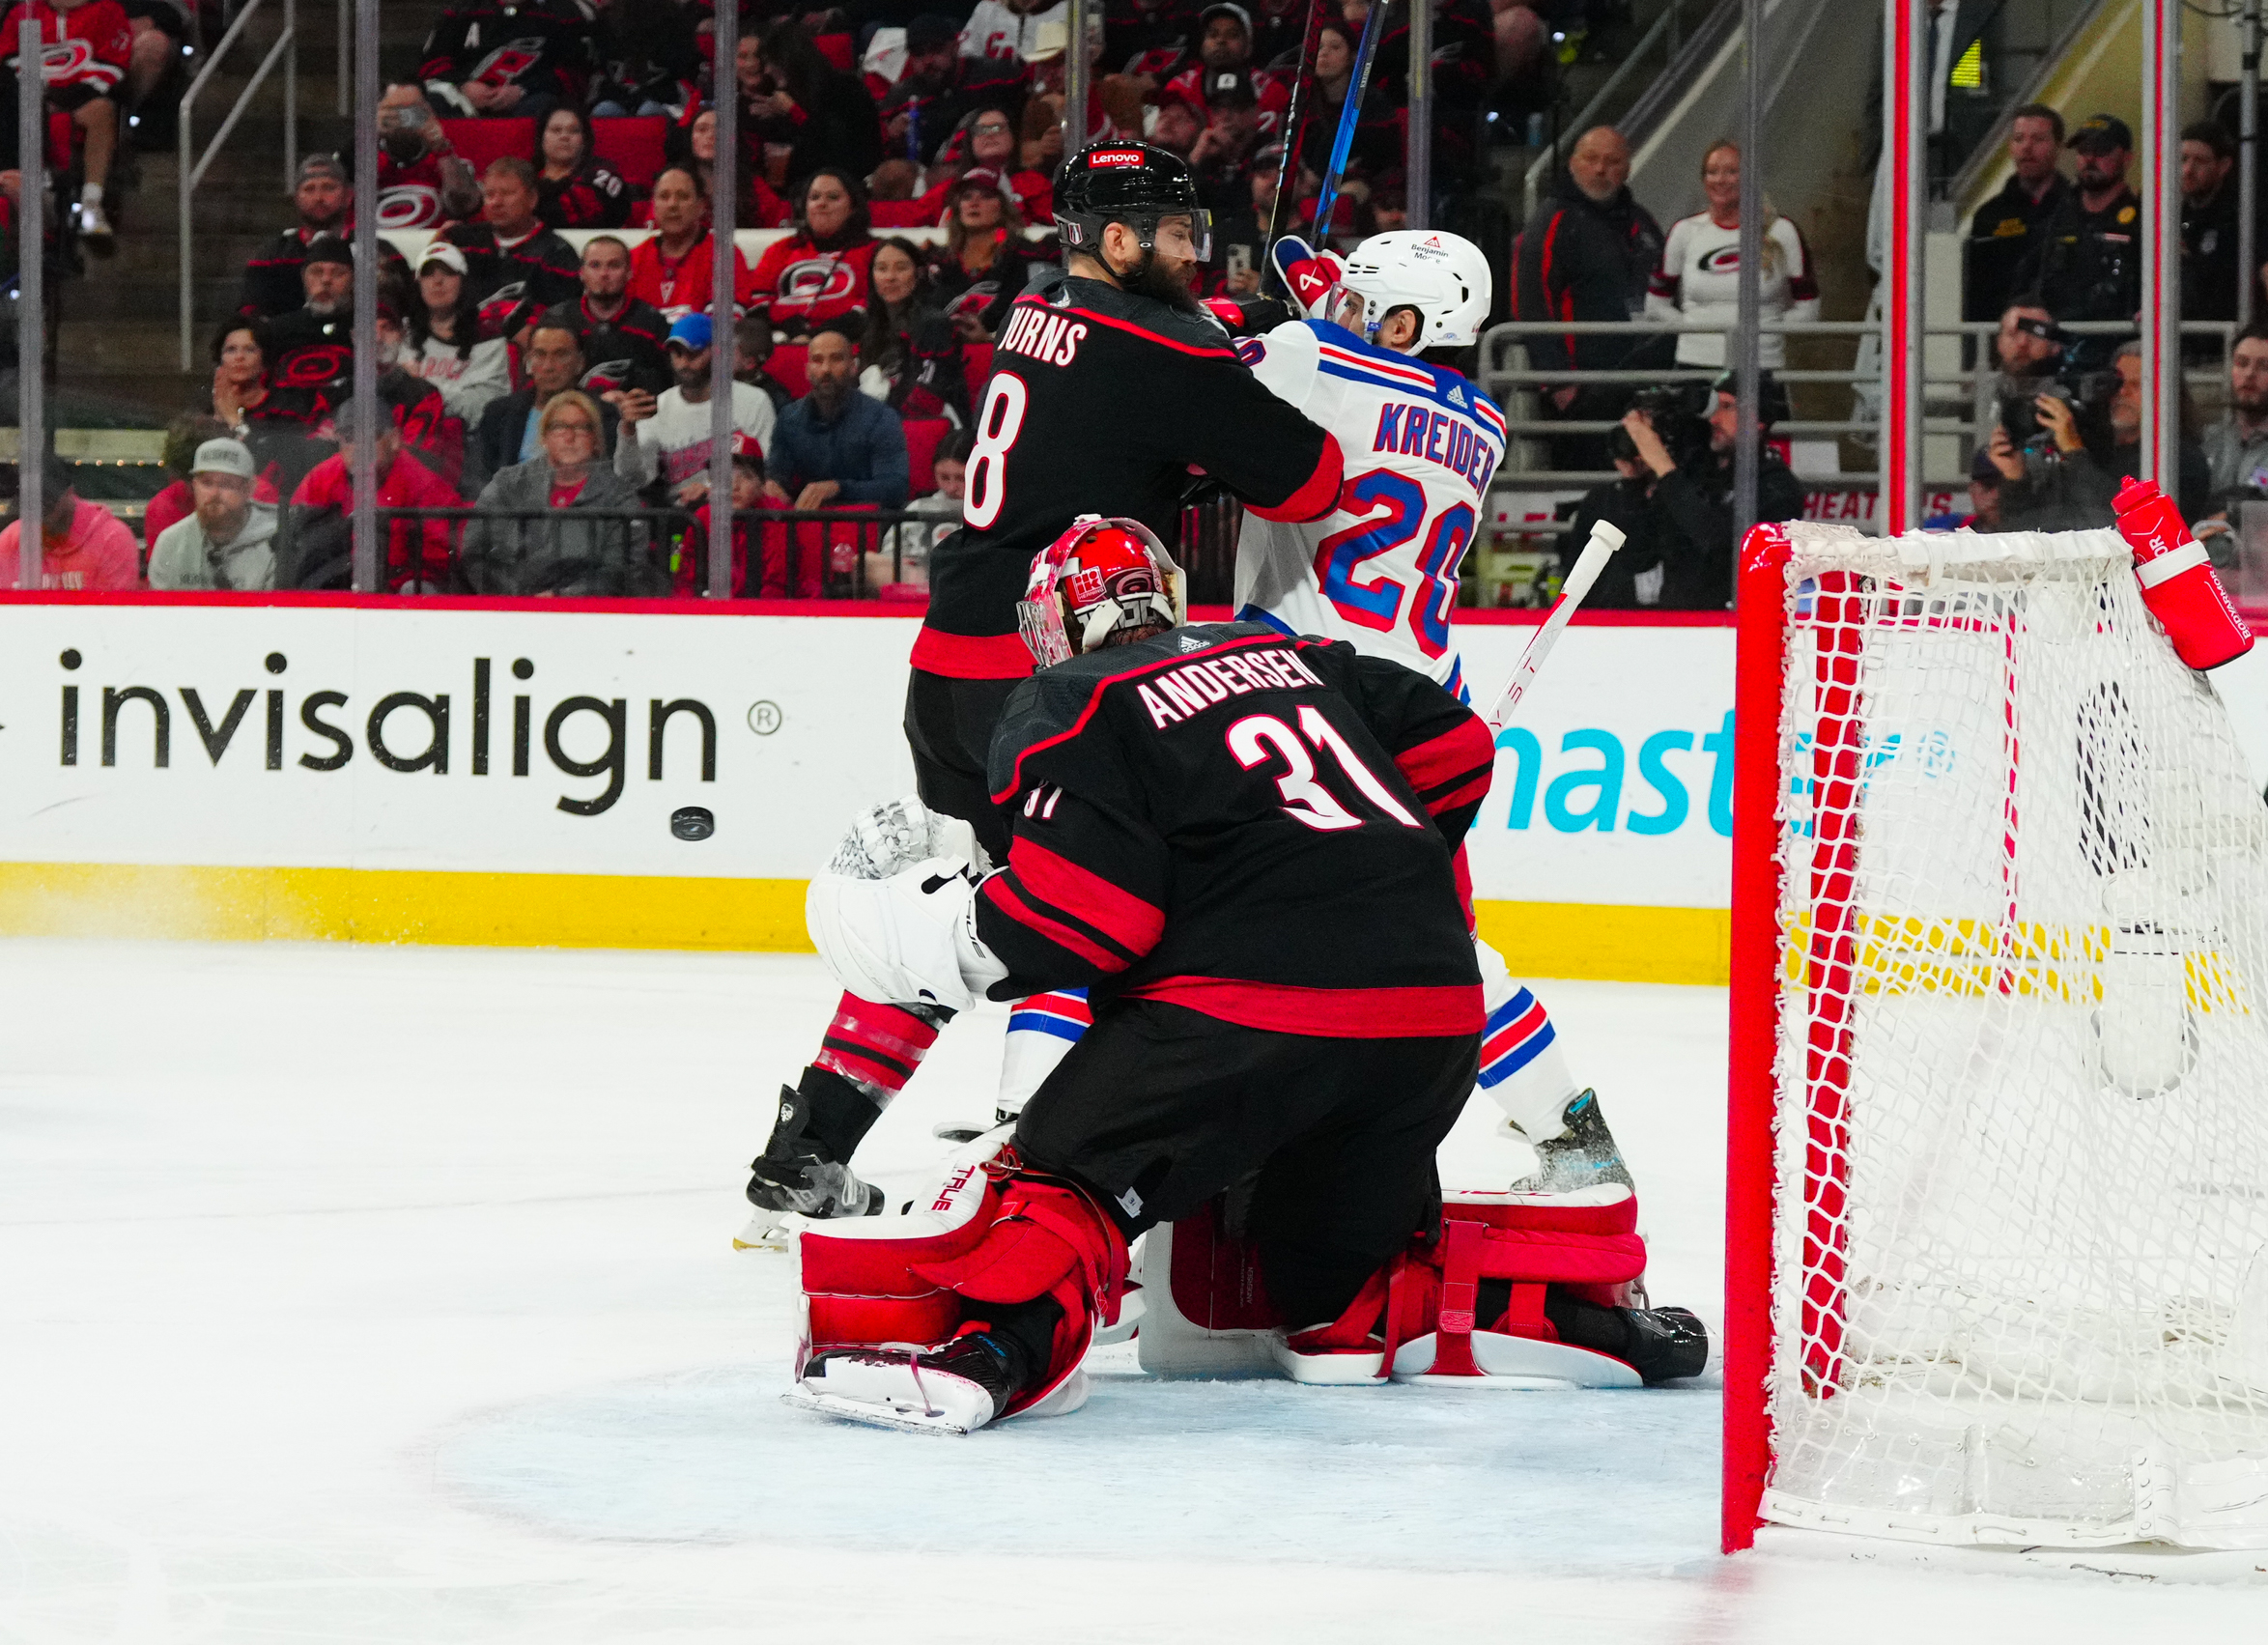 Rangers and Hurricanes Second Round Series Review After 4-2 NYR Win